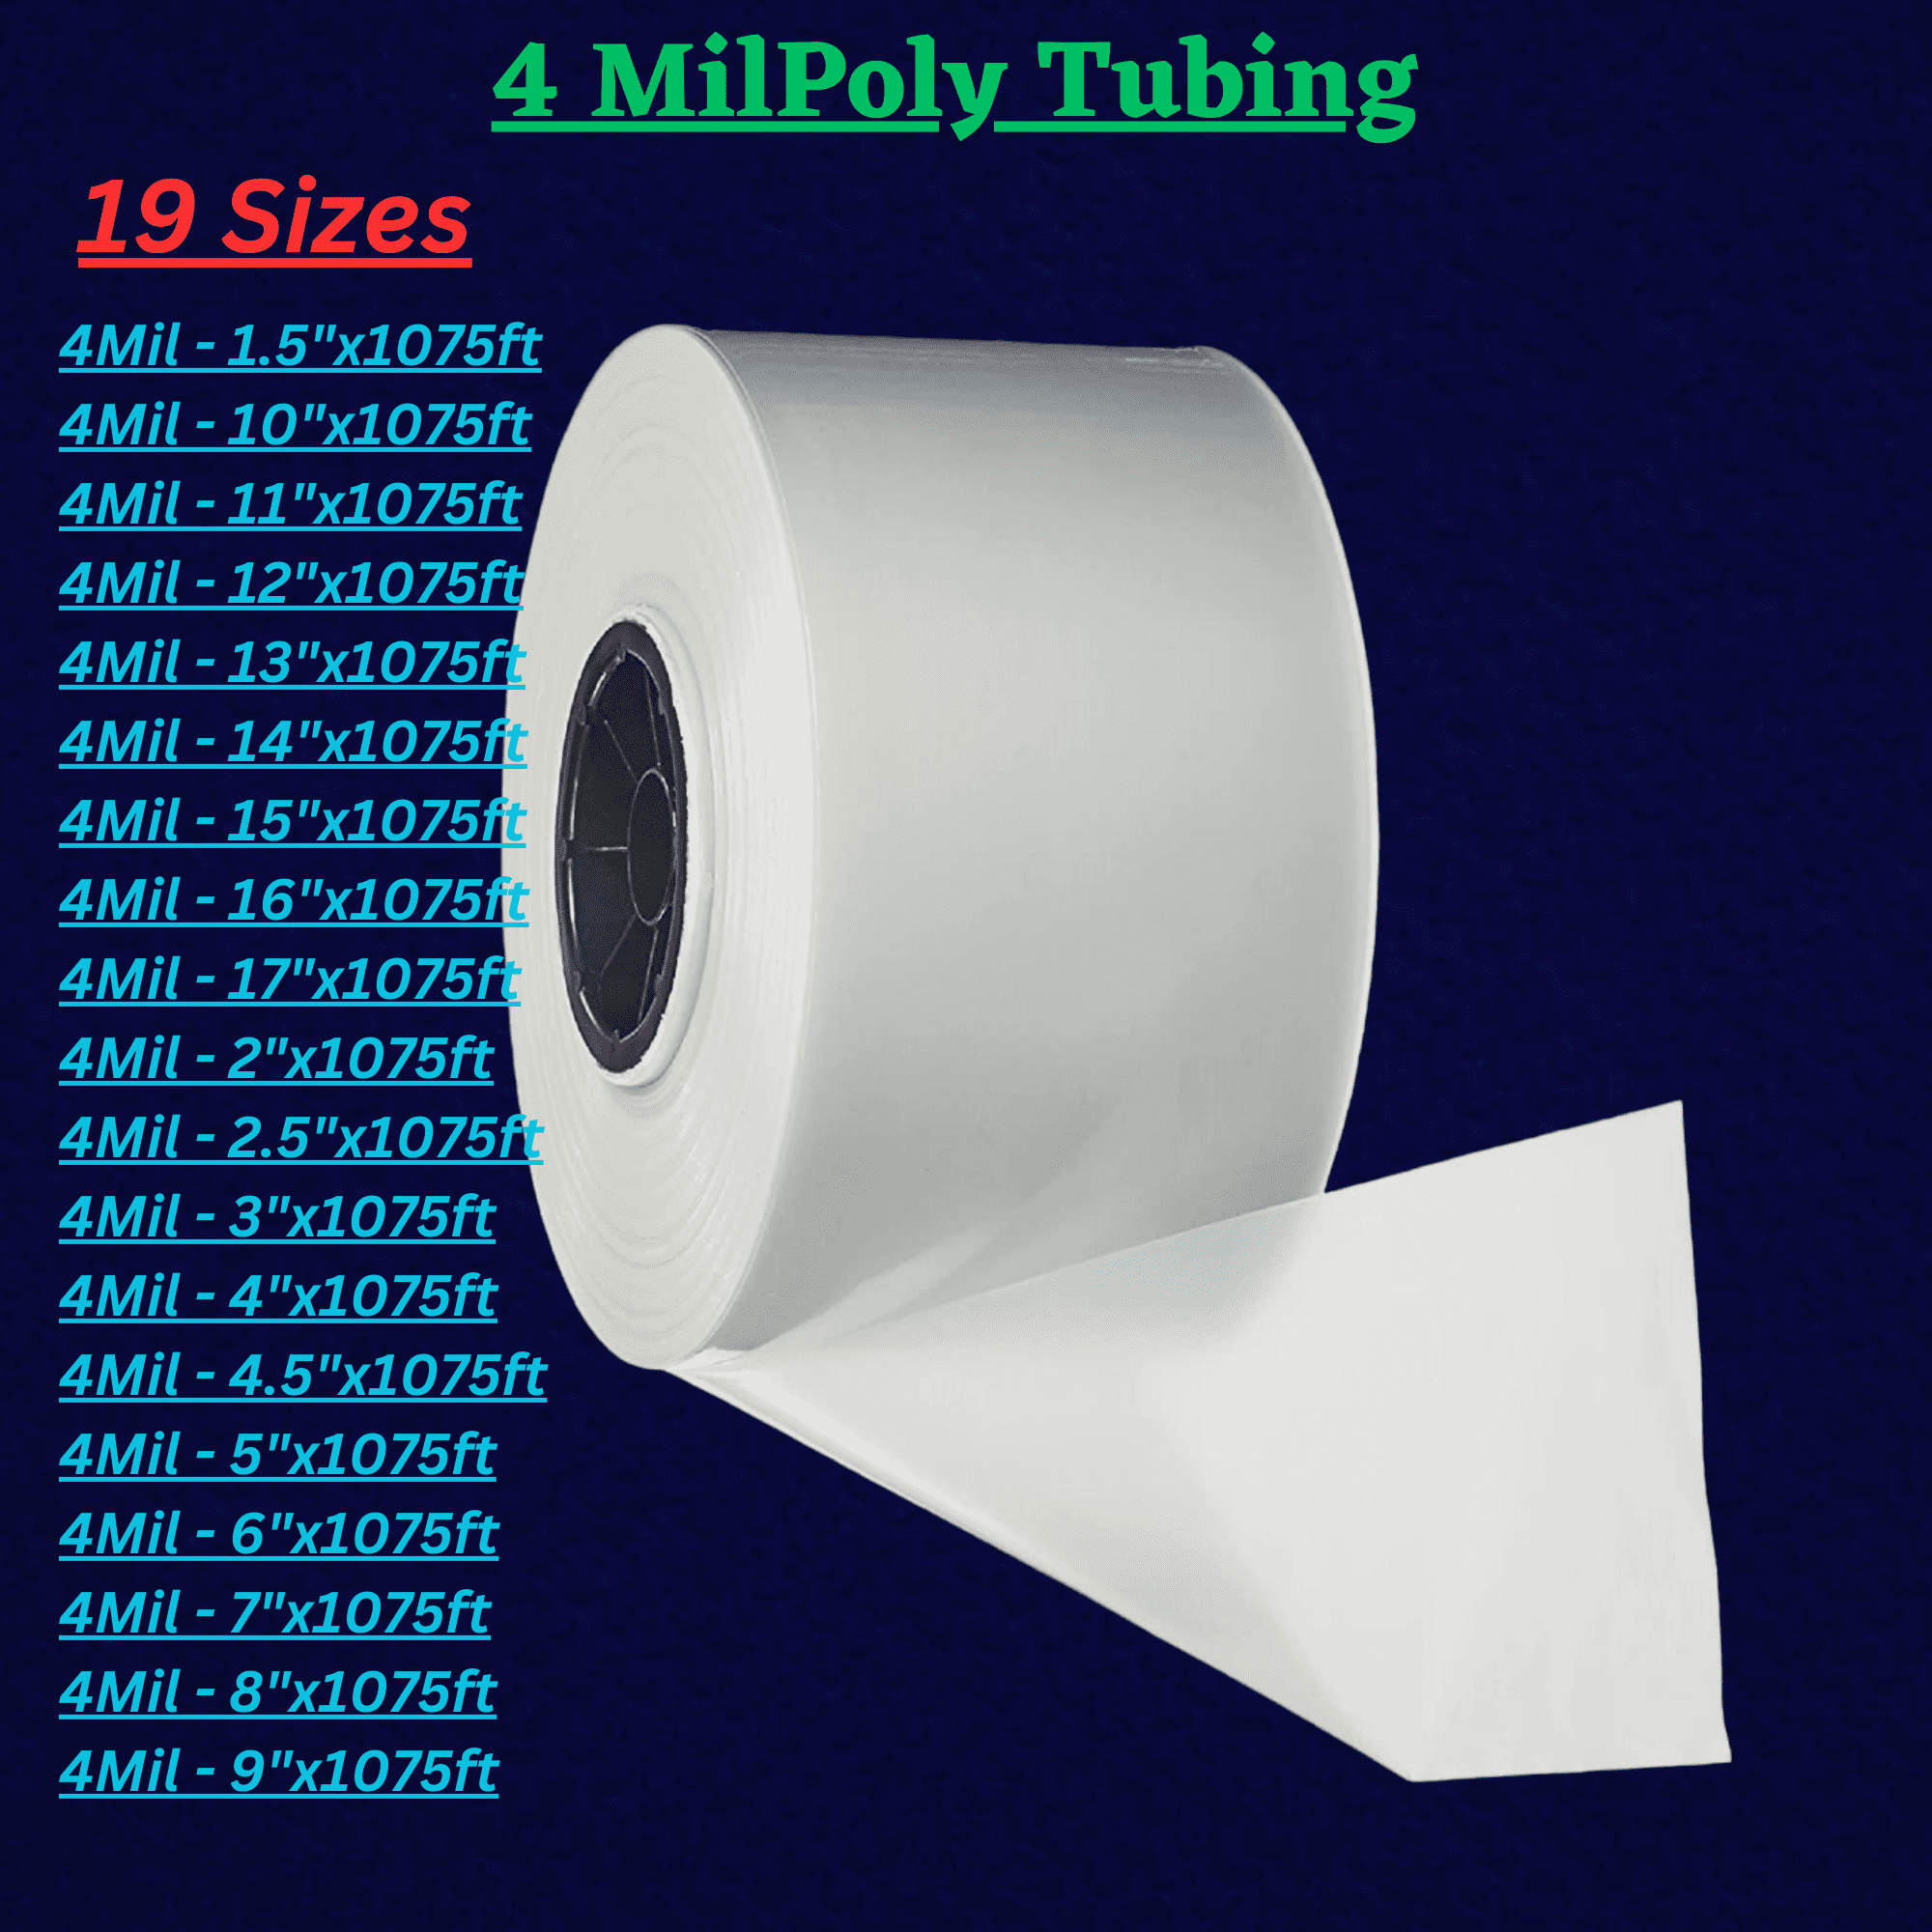 HEAT SEAL BAGS 4 MIL HEAVY DUTY LARGE IMPULSE COMMERCIAL POLY PLASTIC 8 x  21